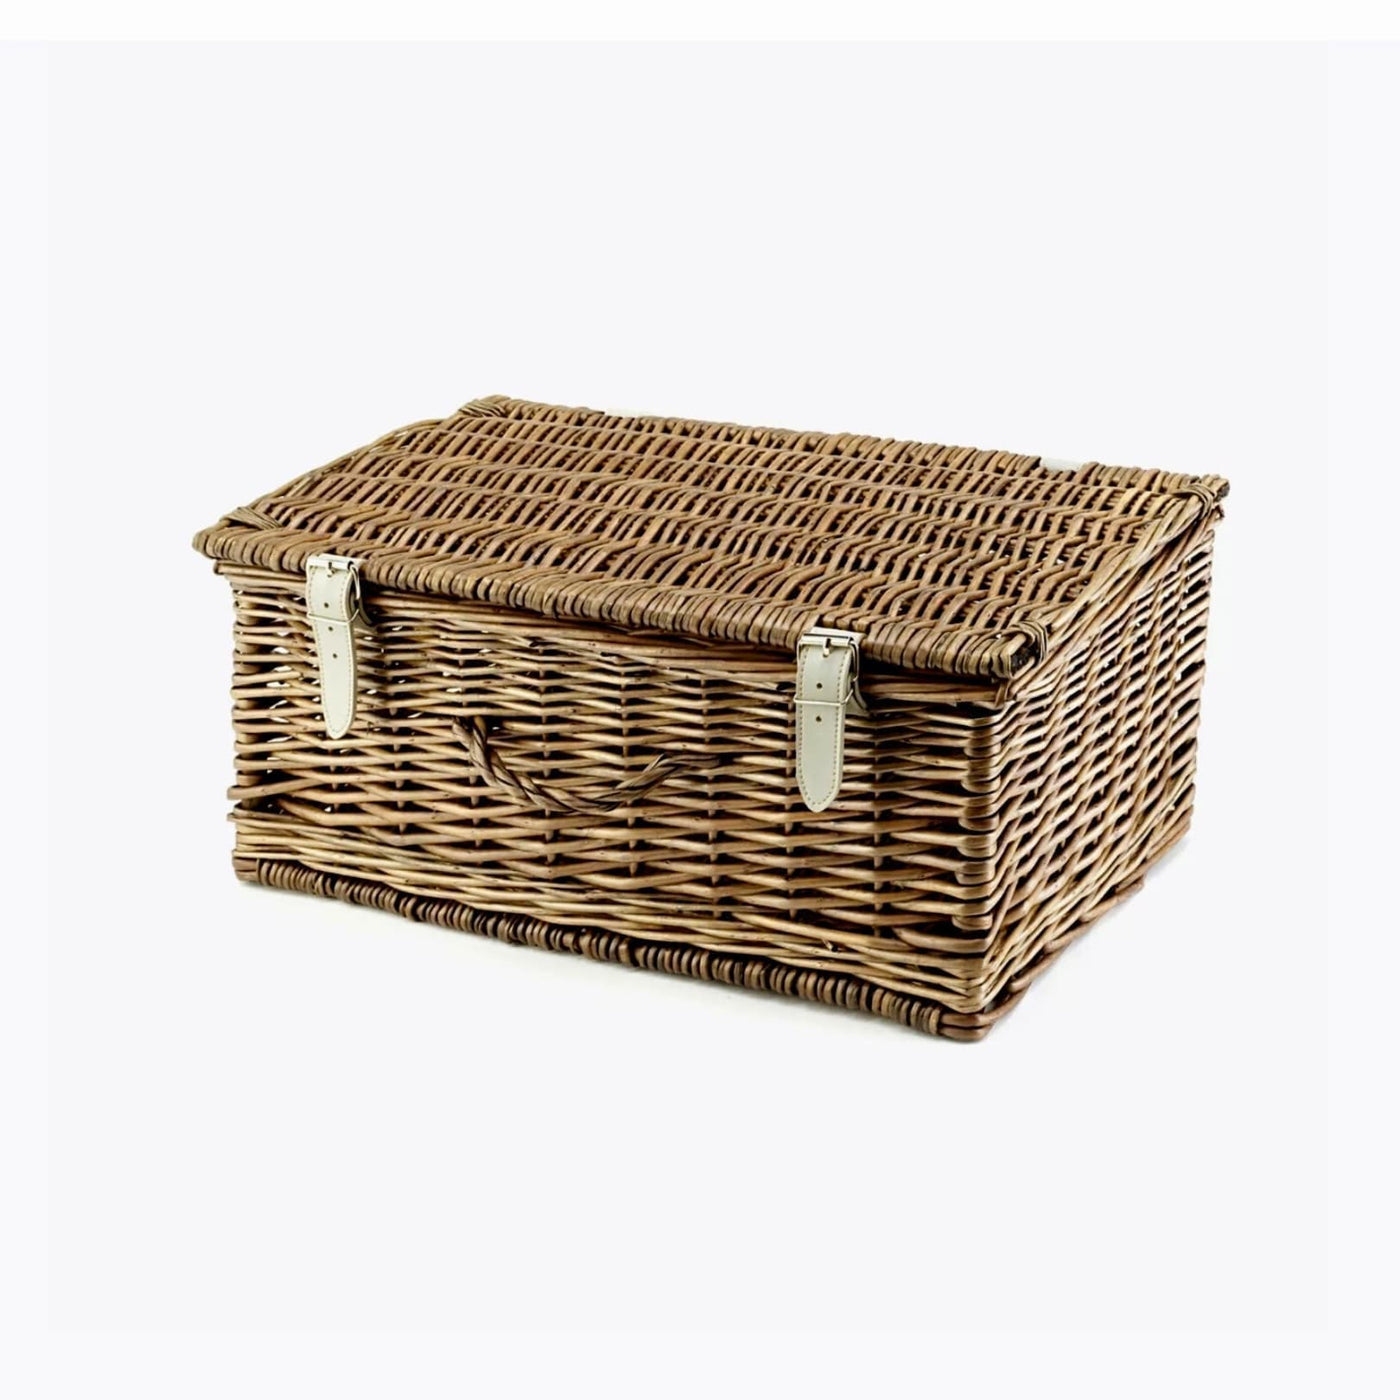 Handwoven 18 inch wicker hamper in antique bronze finish with wicker handle and grey straps. 